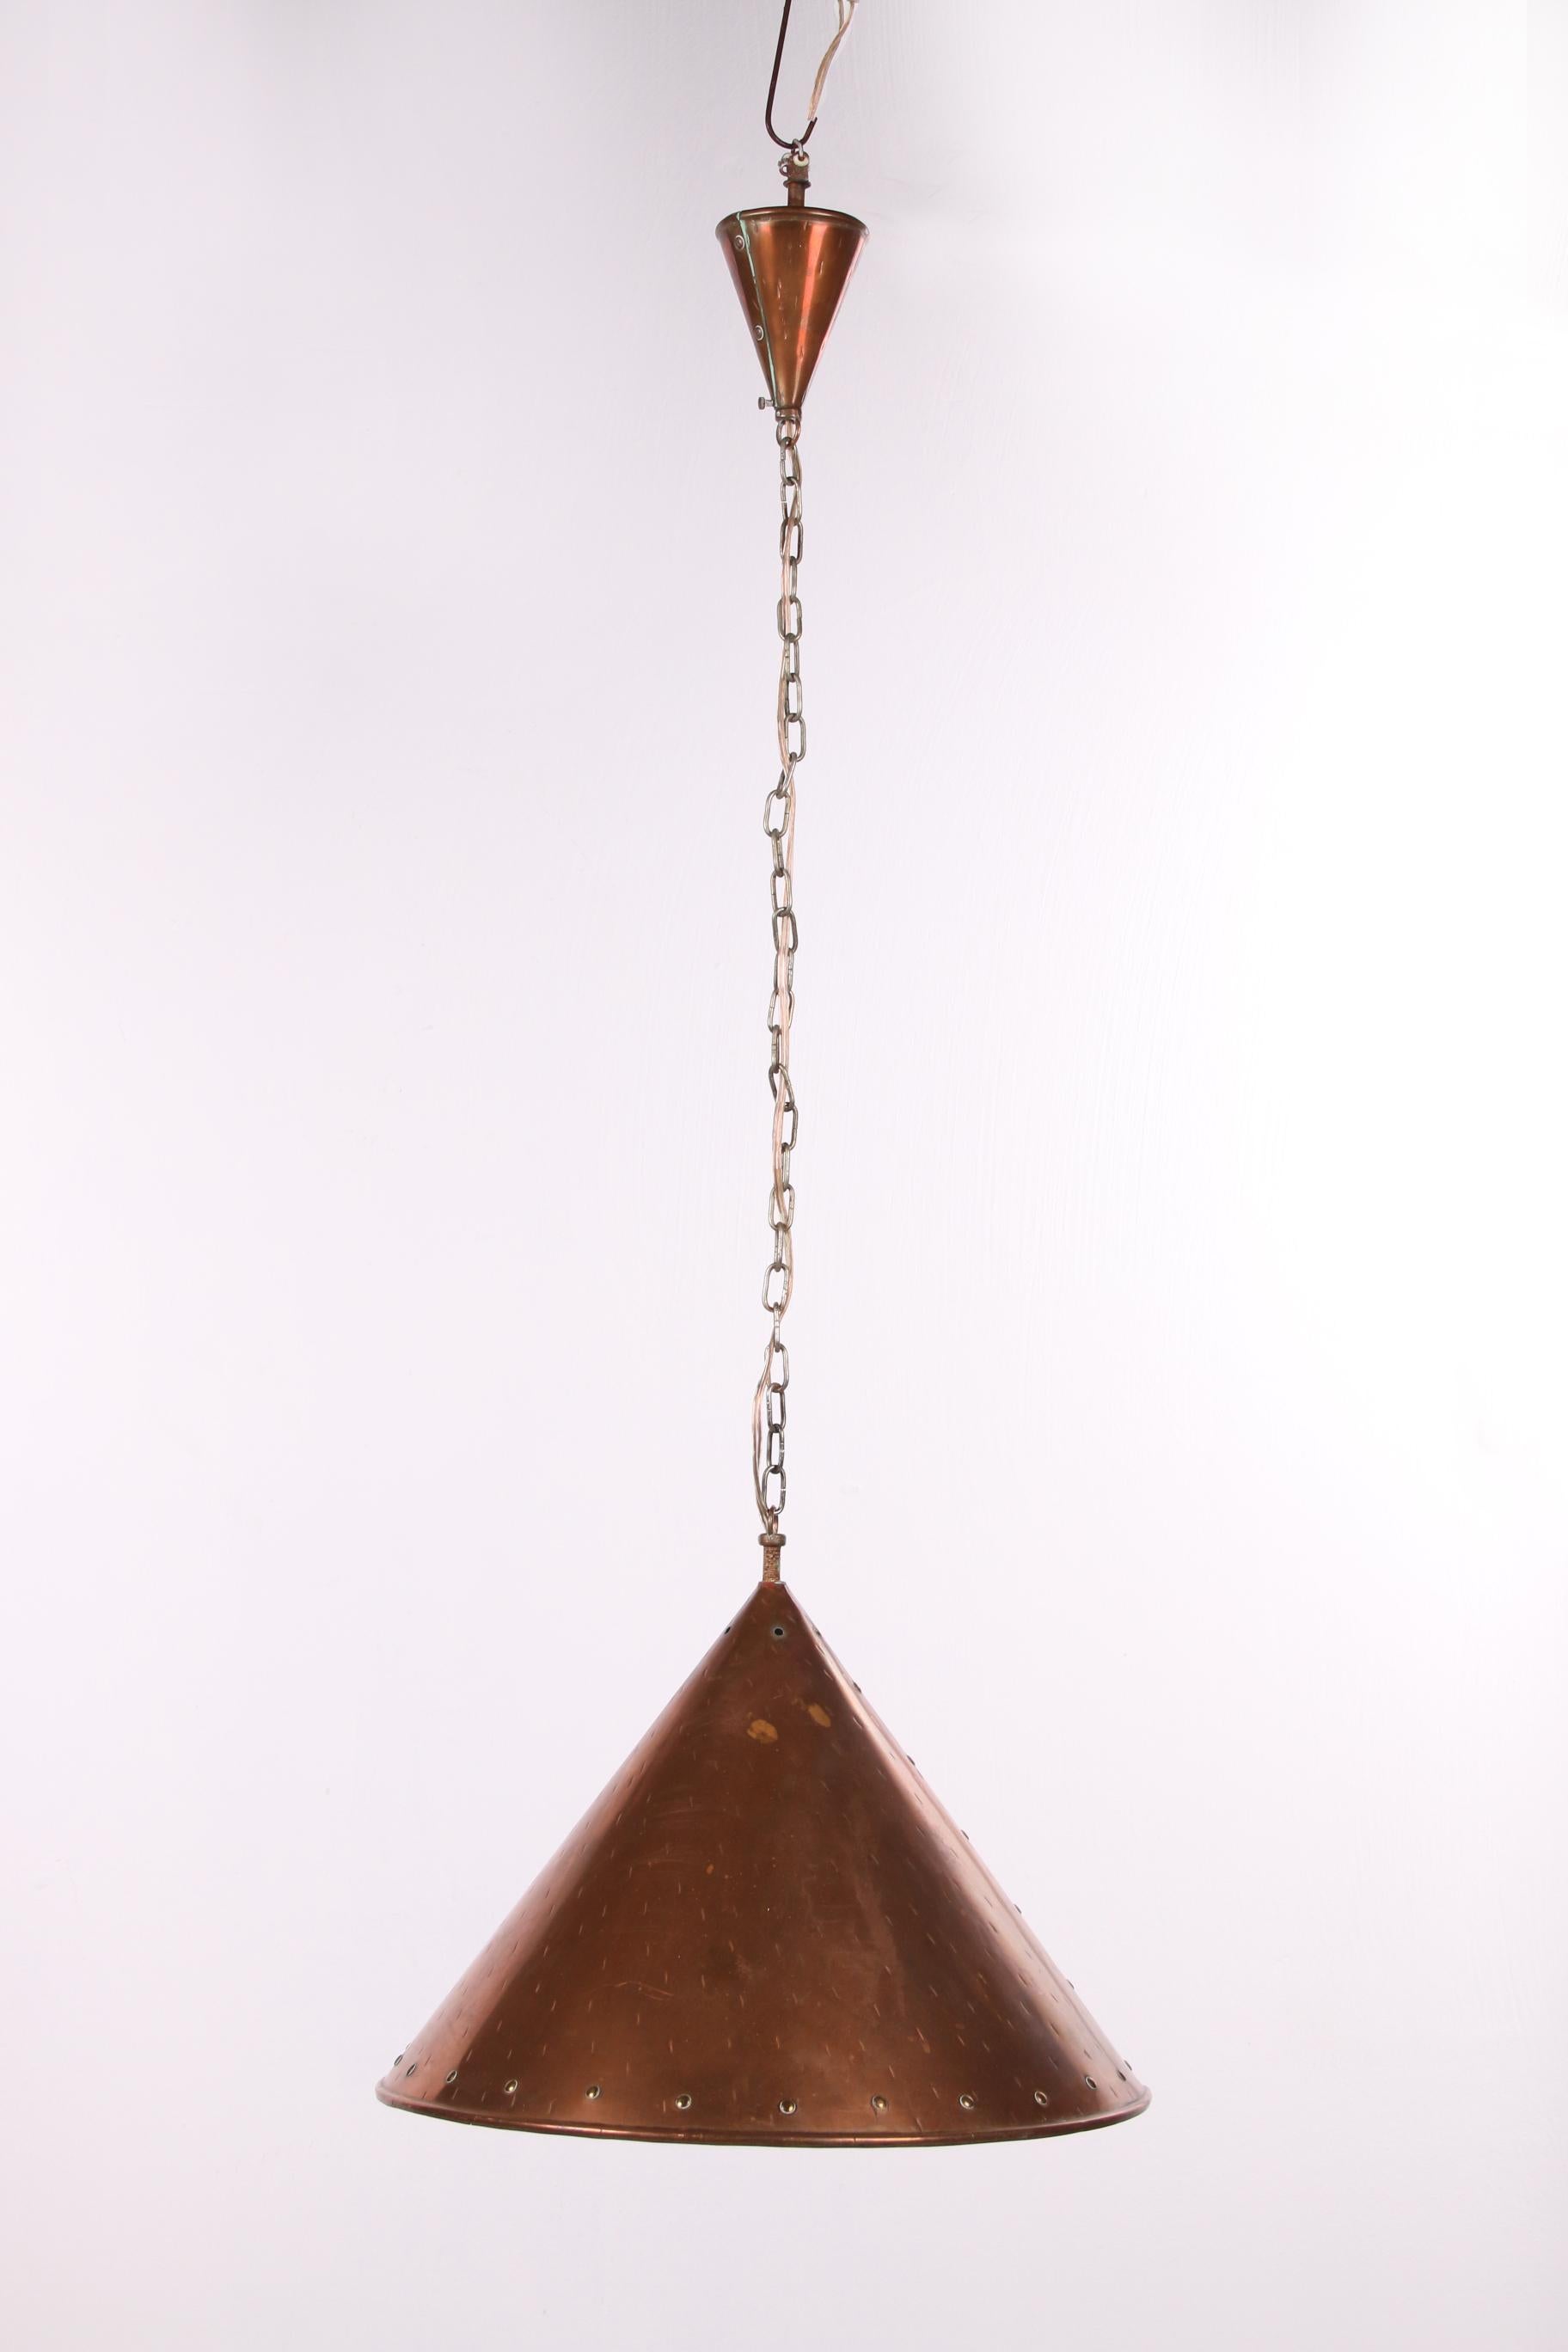 Danish Hand Hammered Copper Pendant Lamps by ES Horn Aalestrup, 1950s In Good Condition For Sale In Oostrum-Venray, NL